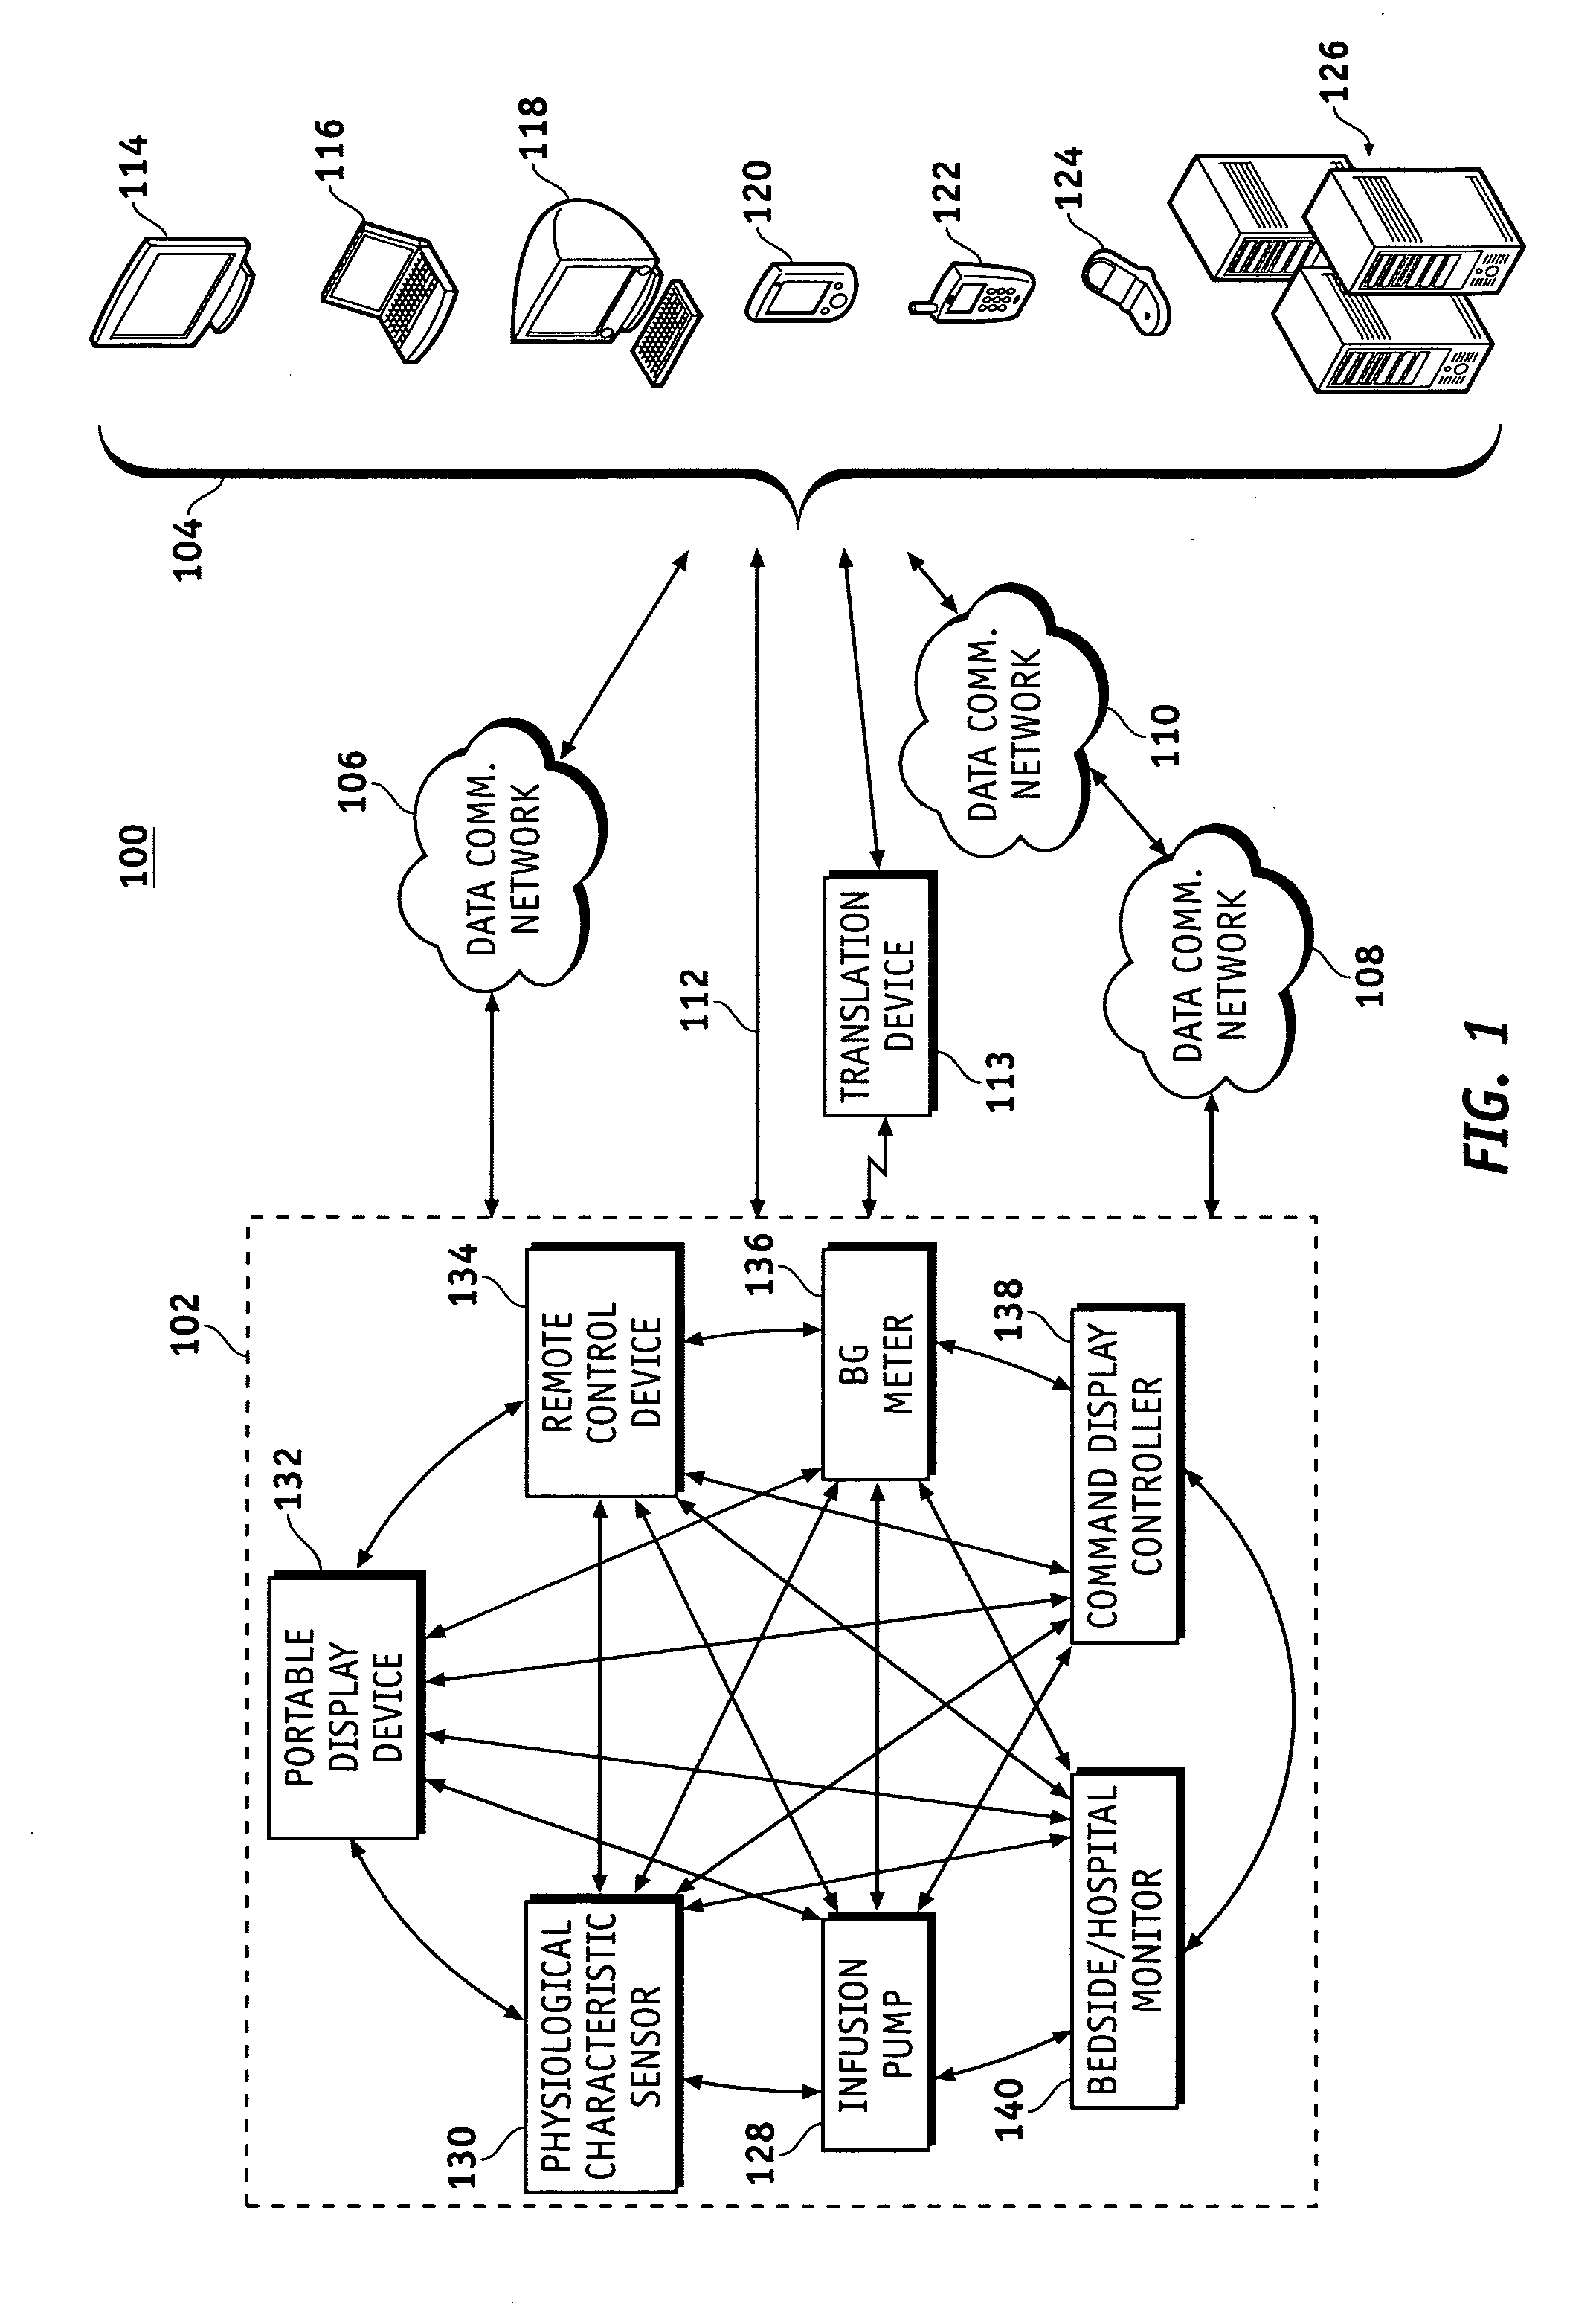 Router device for centralized management of medical device data